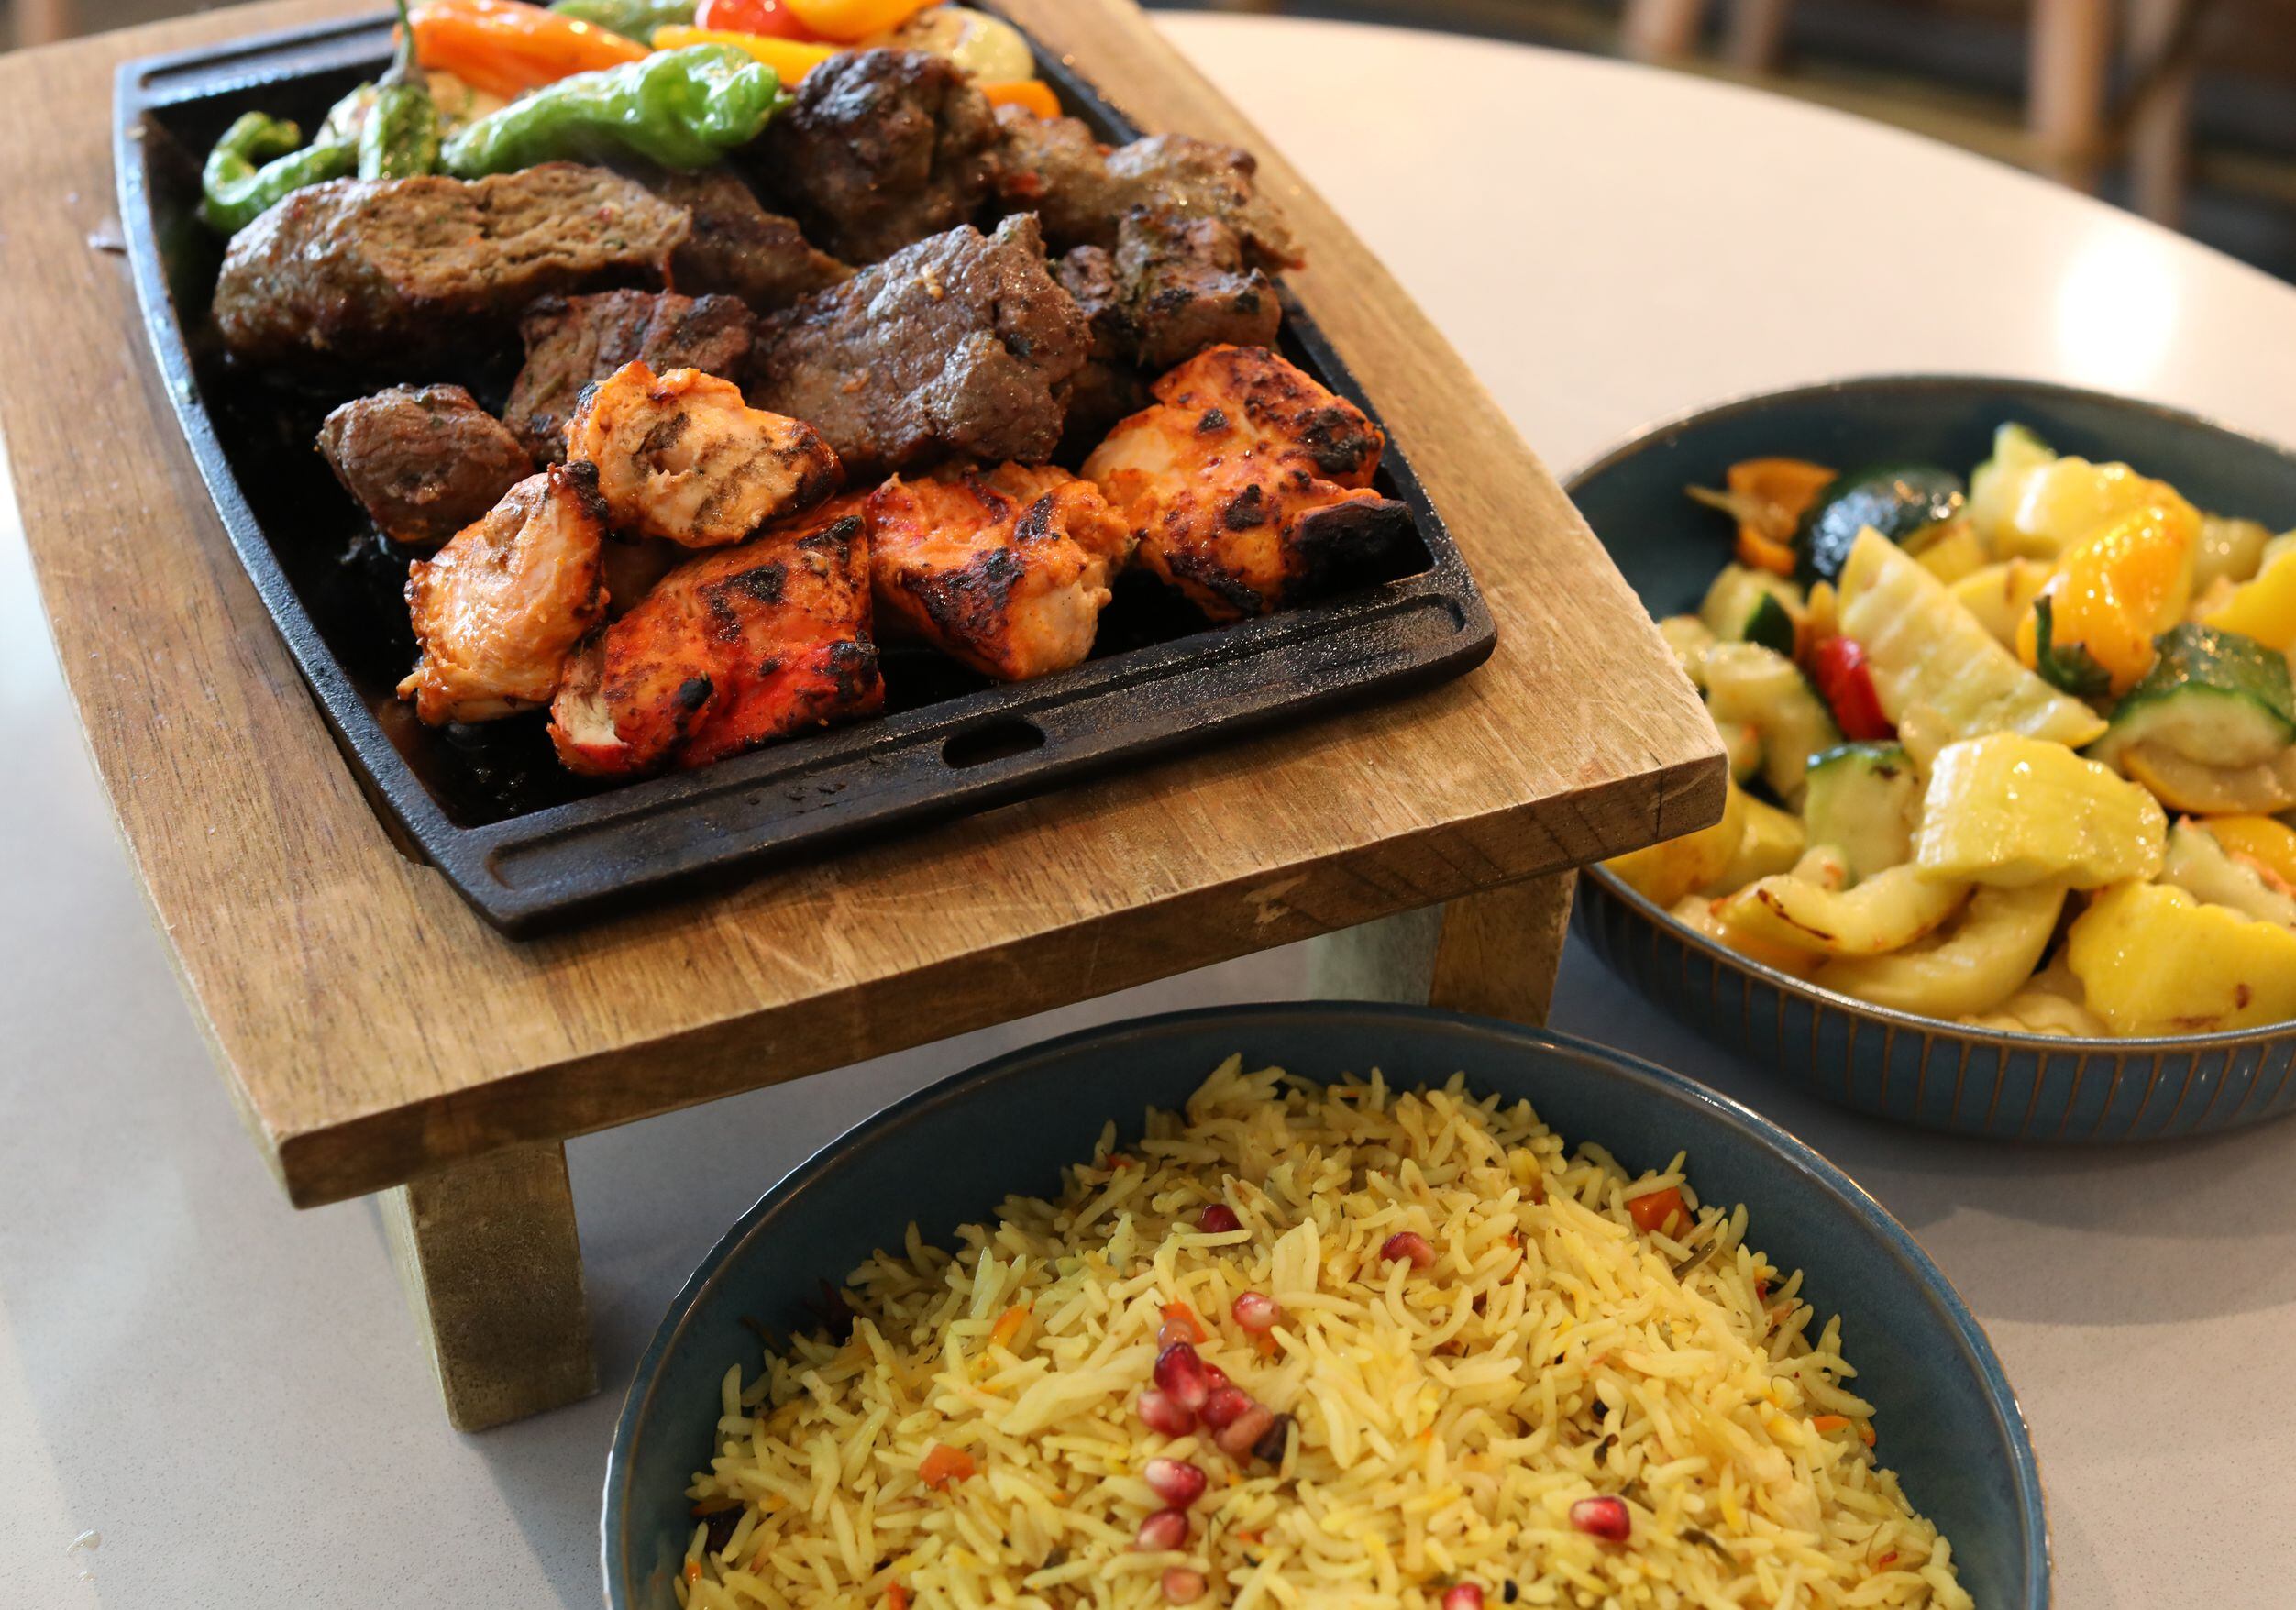 Kabab Board For Two at Darna in Plano